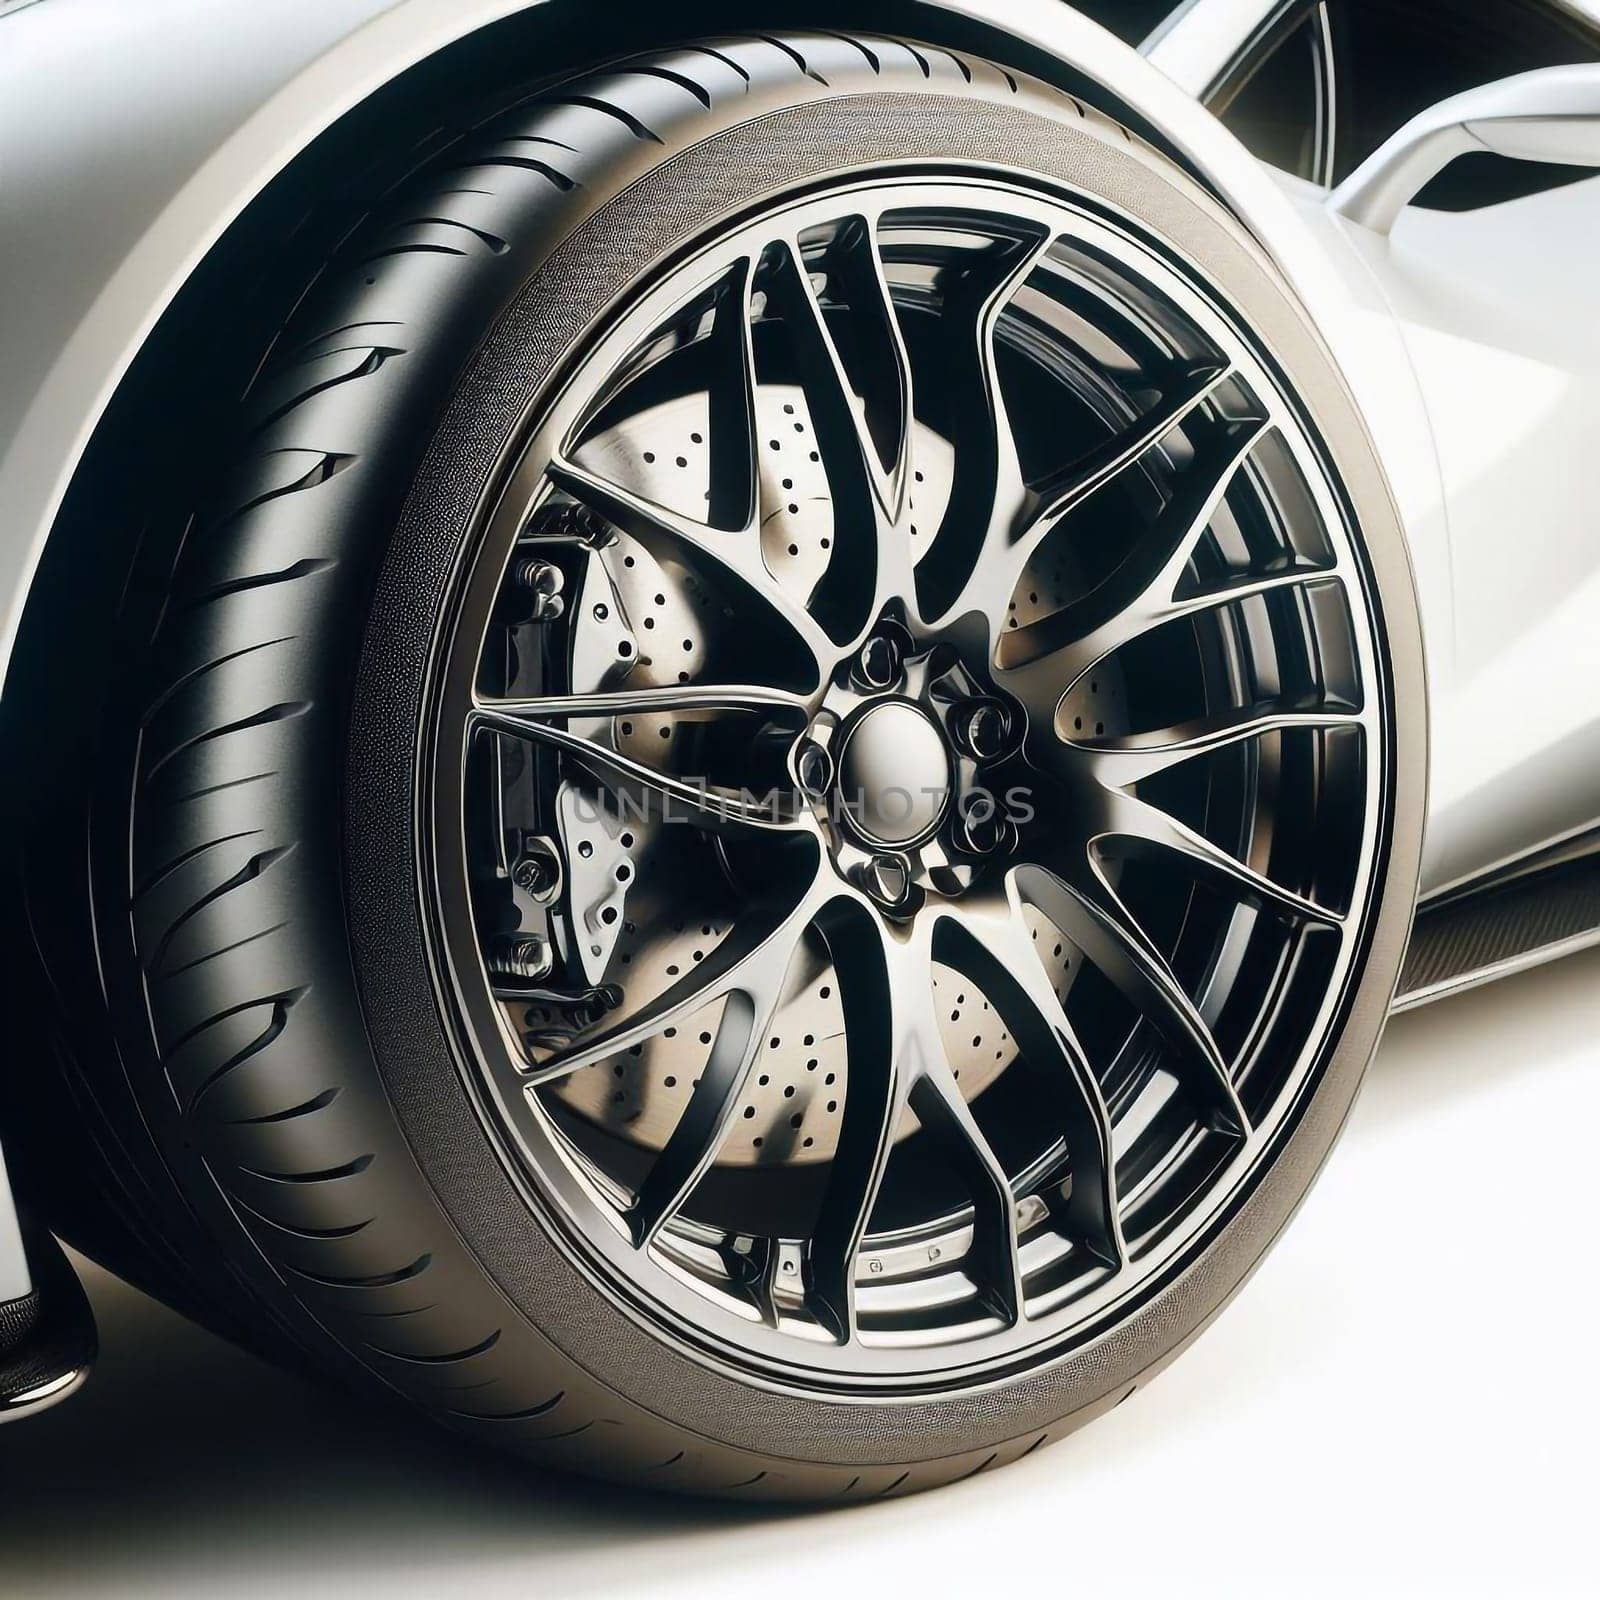 Sports car wheel for the automobile companies